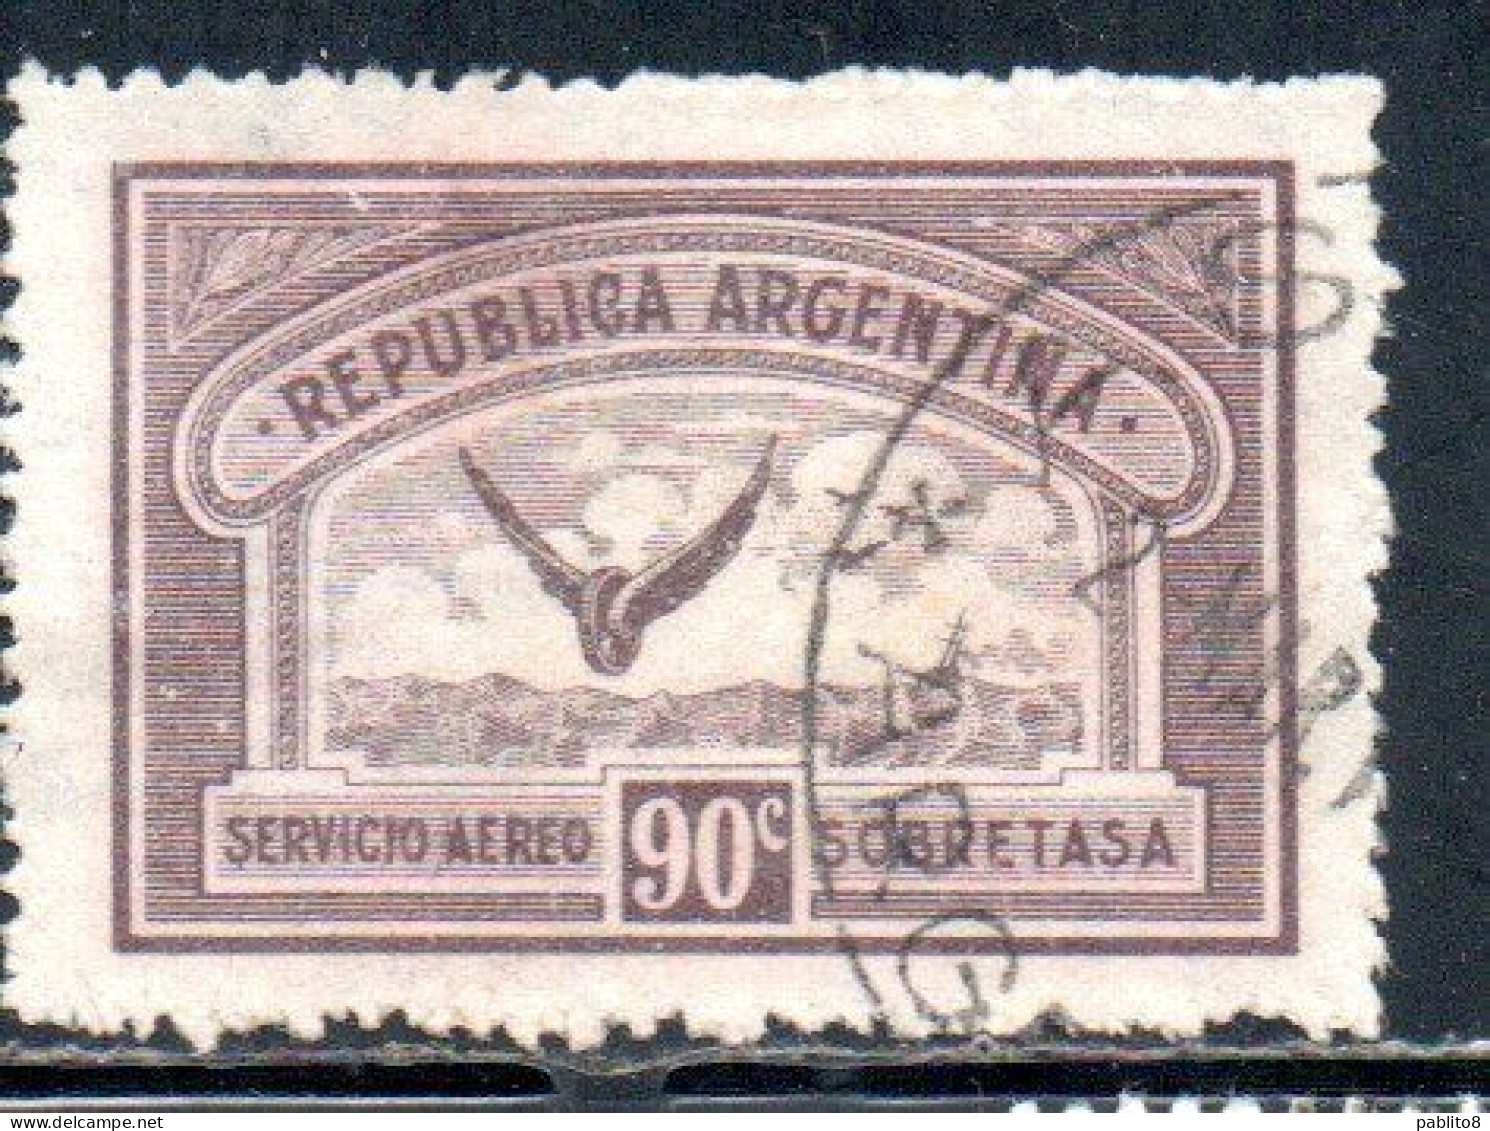 ARGENTINA 1928 AIR POST MAIL CORREO AEREO AIRMAIL WINGS CROSS THE SEA 90c USED USADO OBLITERE' - Aéreo